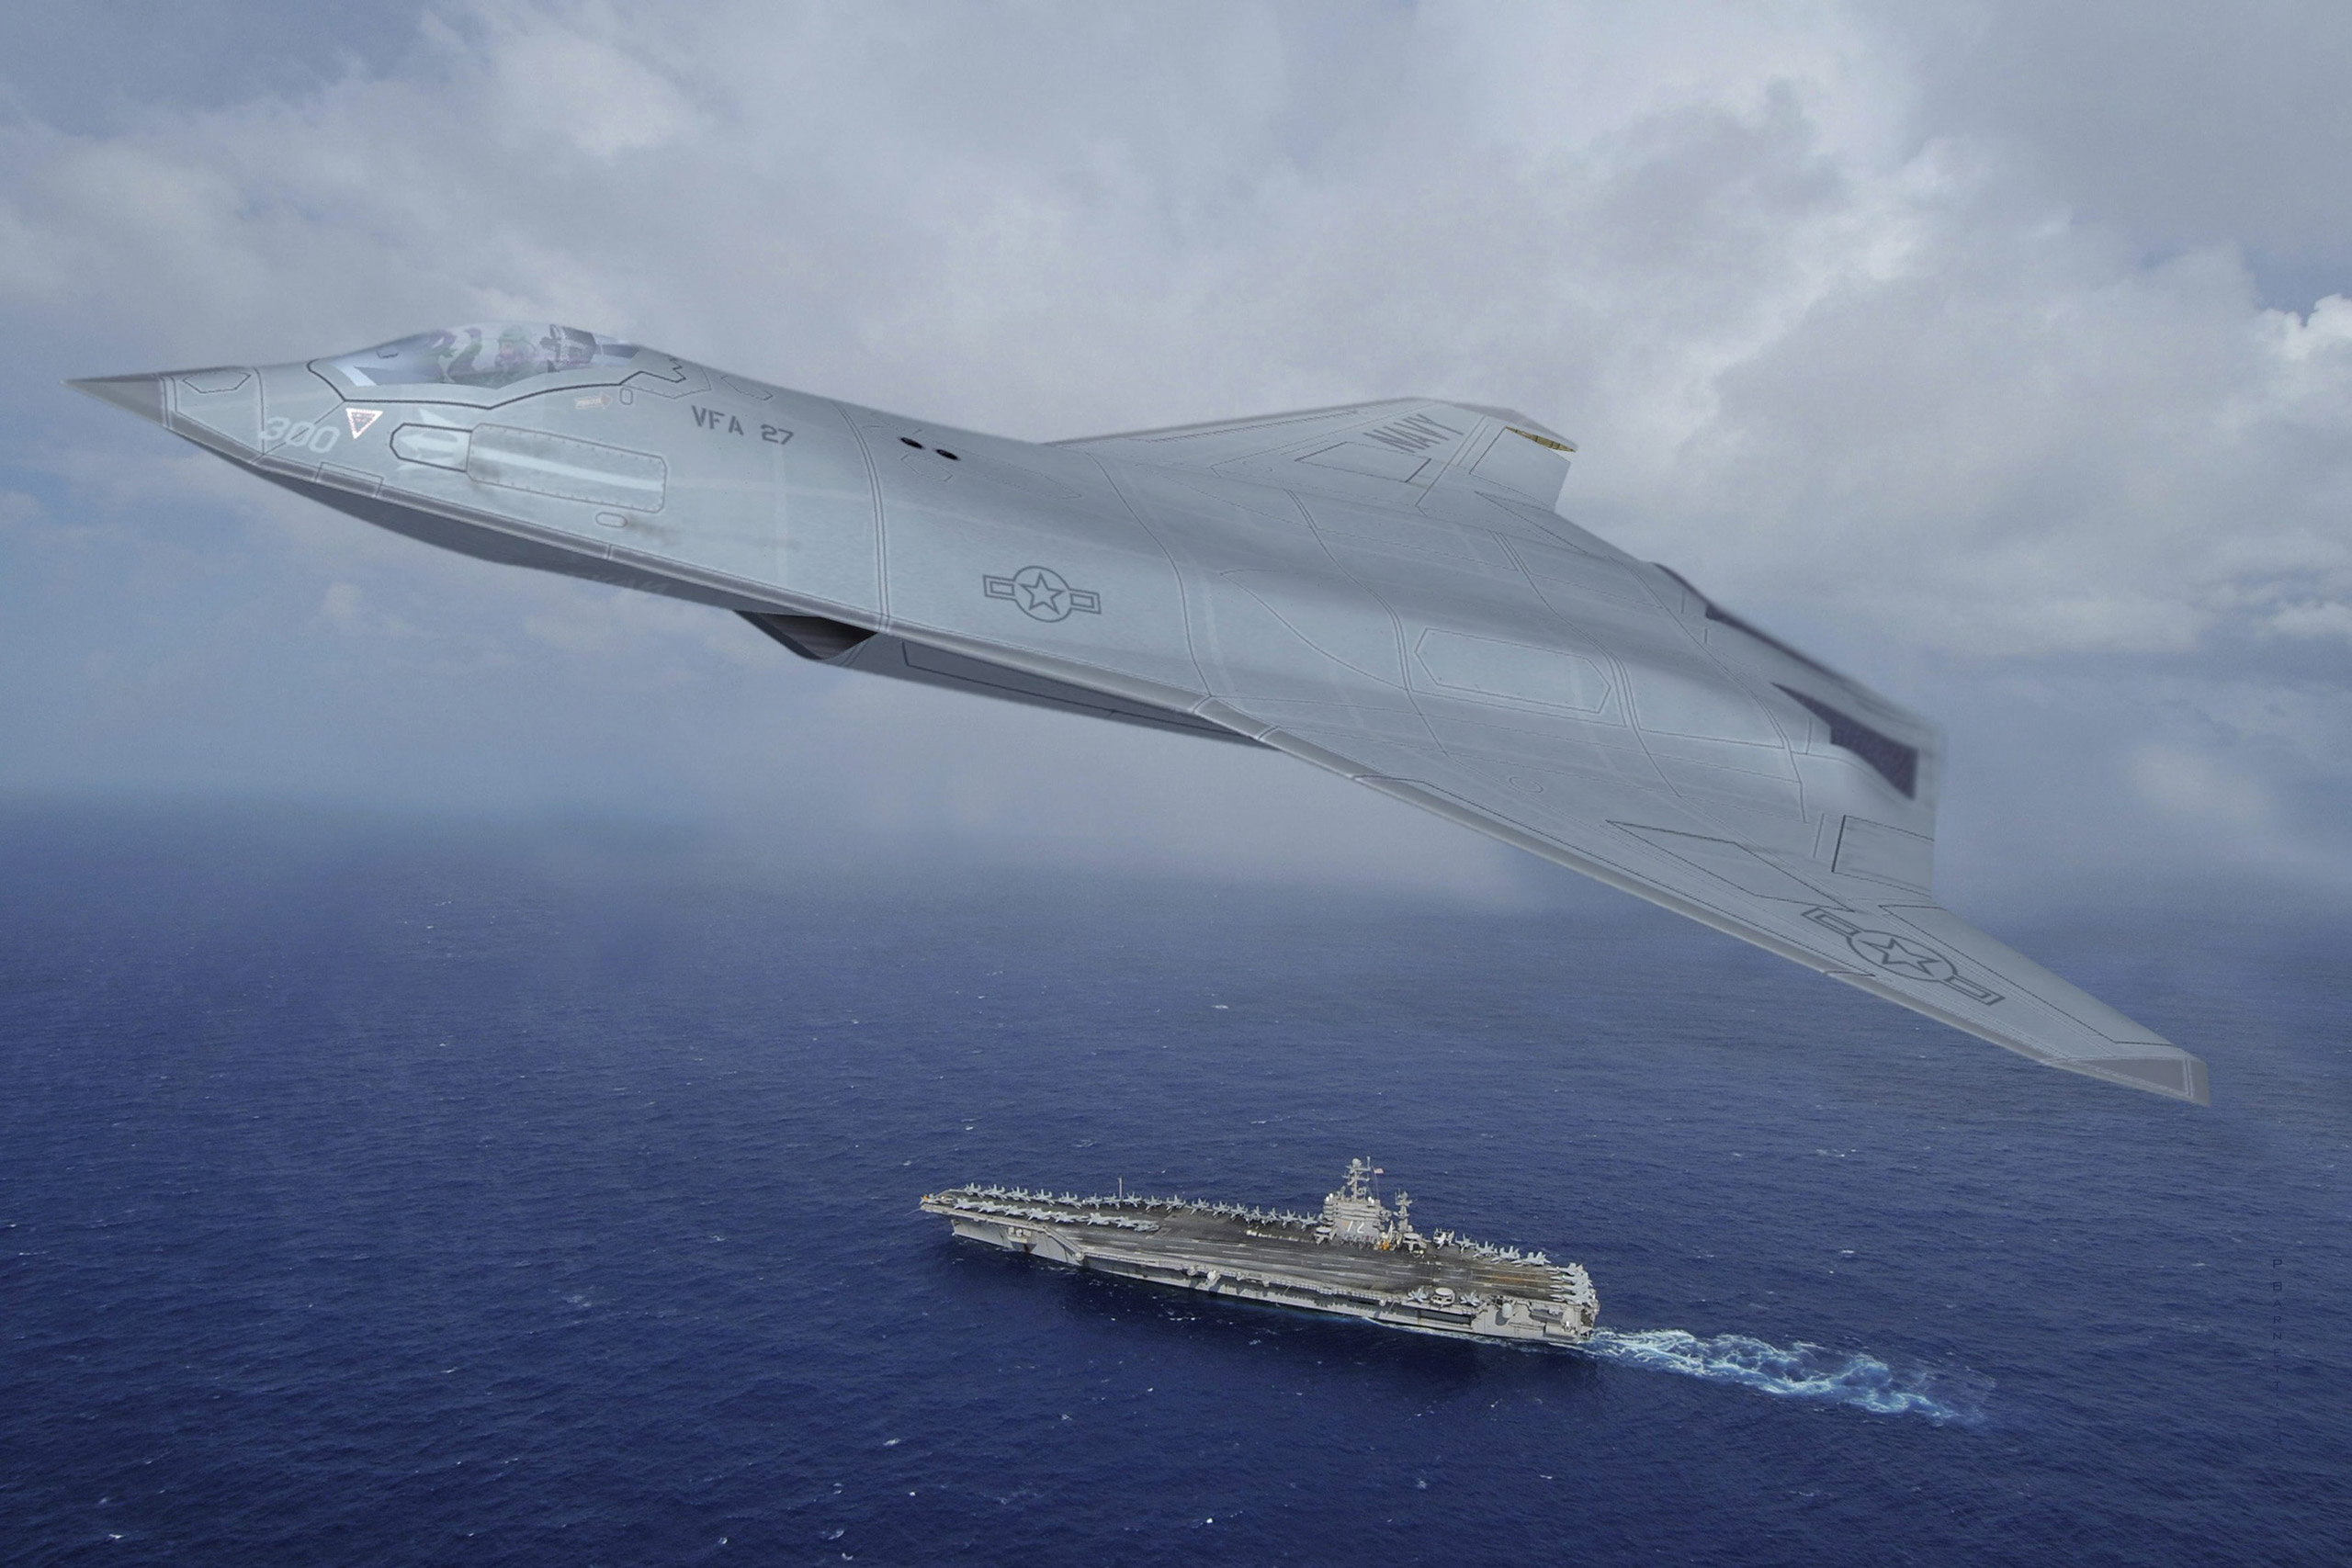 An artist's rendering of what the next generation U.S. fighter jet might look like is seen in this handout photo provided by Northrop Grumman Corporation on Dec. 12, 2015. (Reuters)